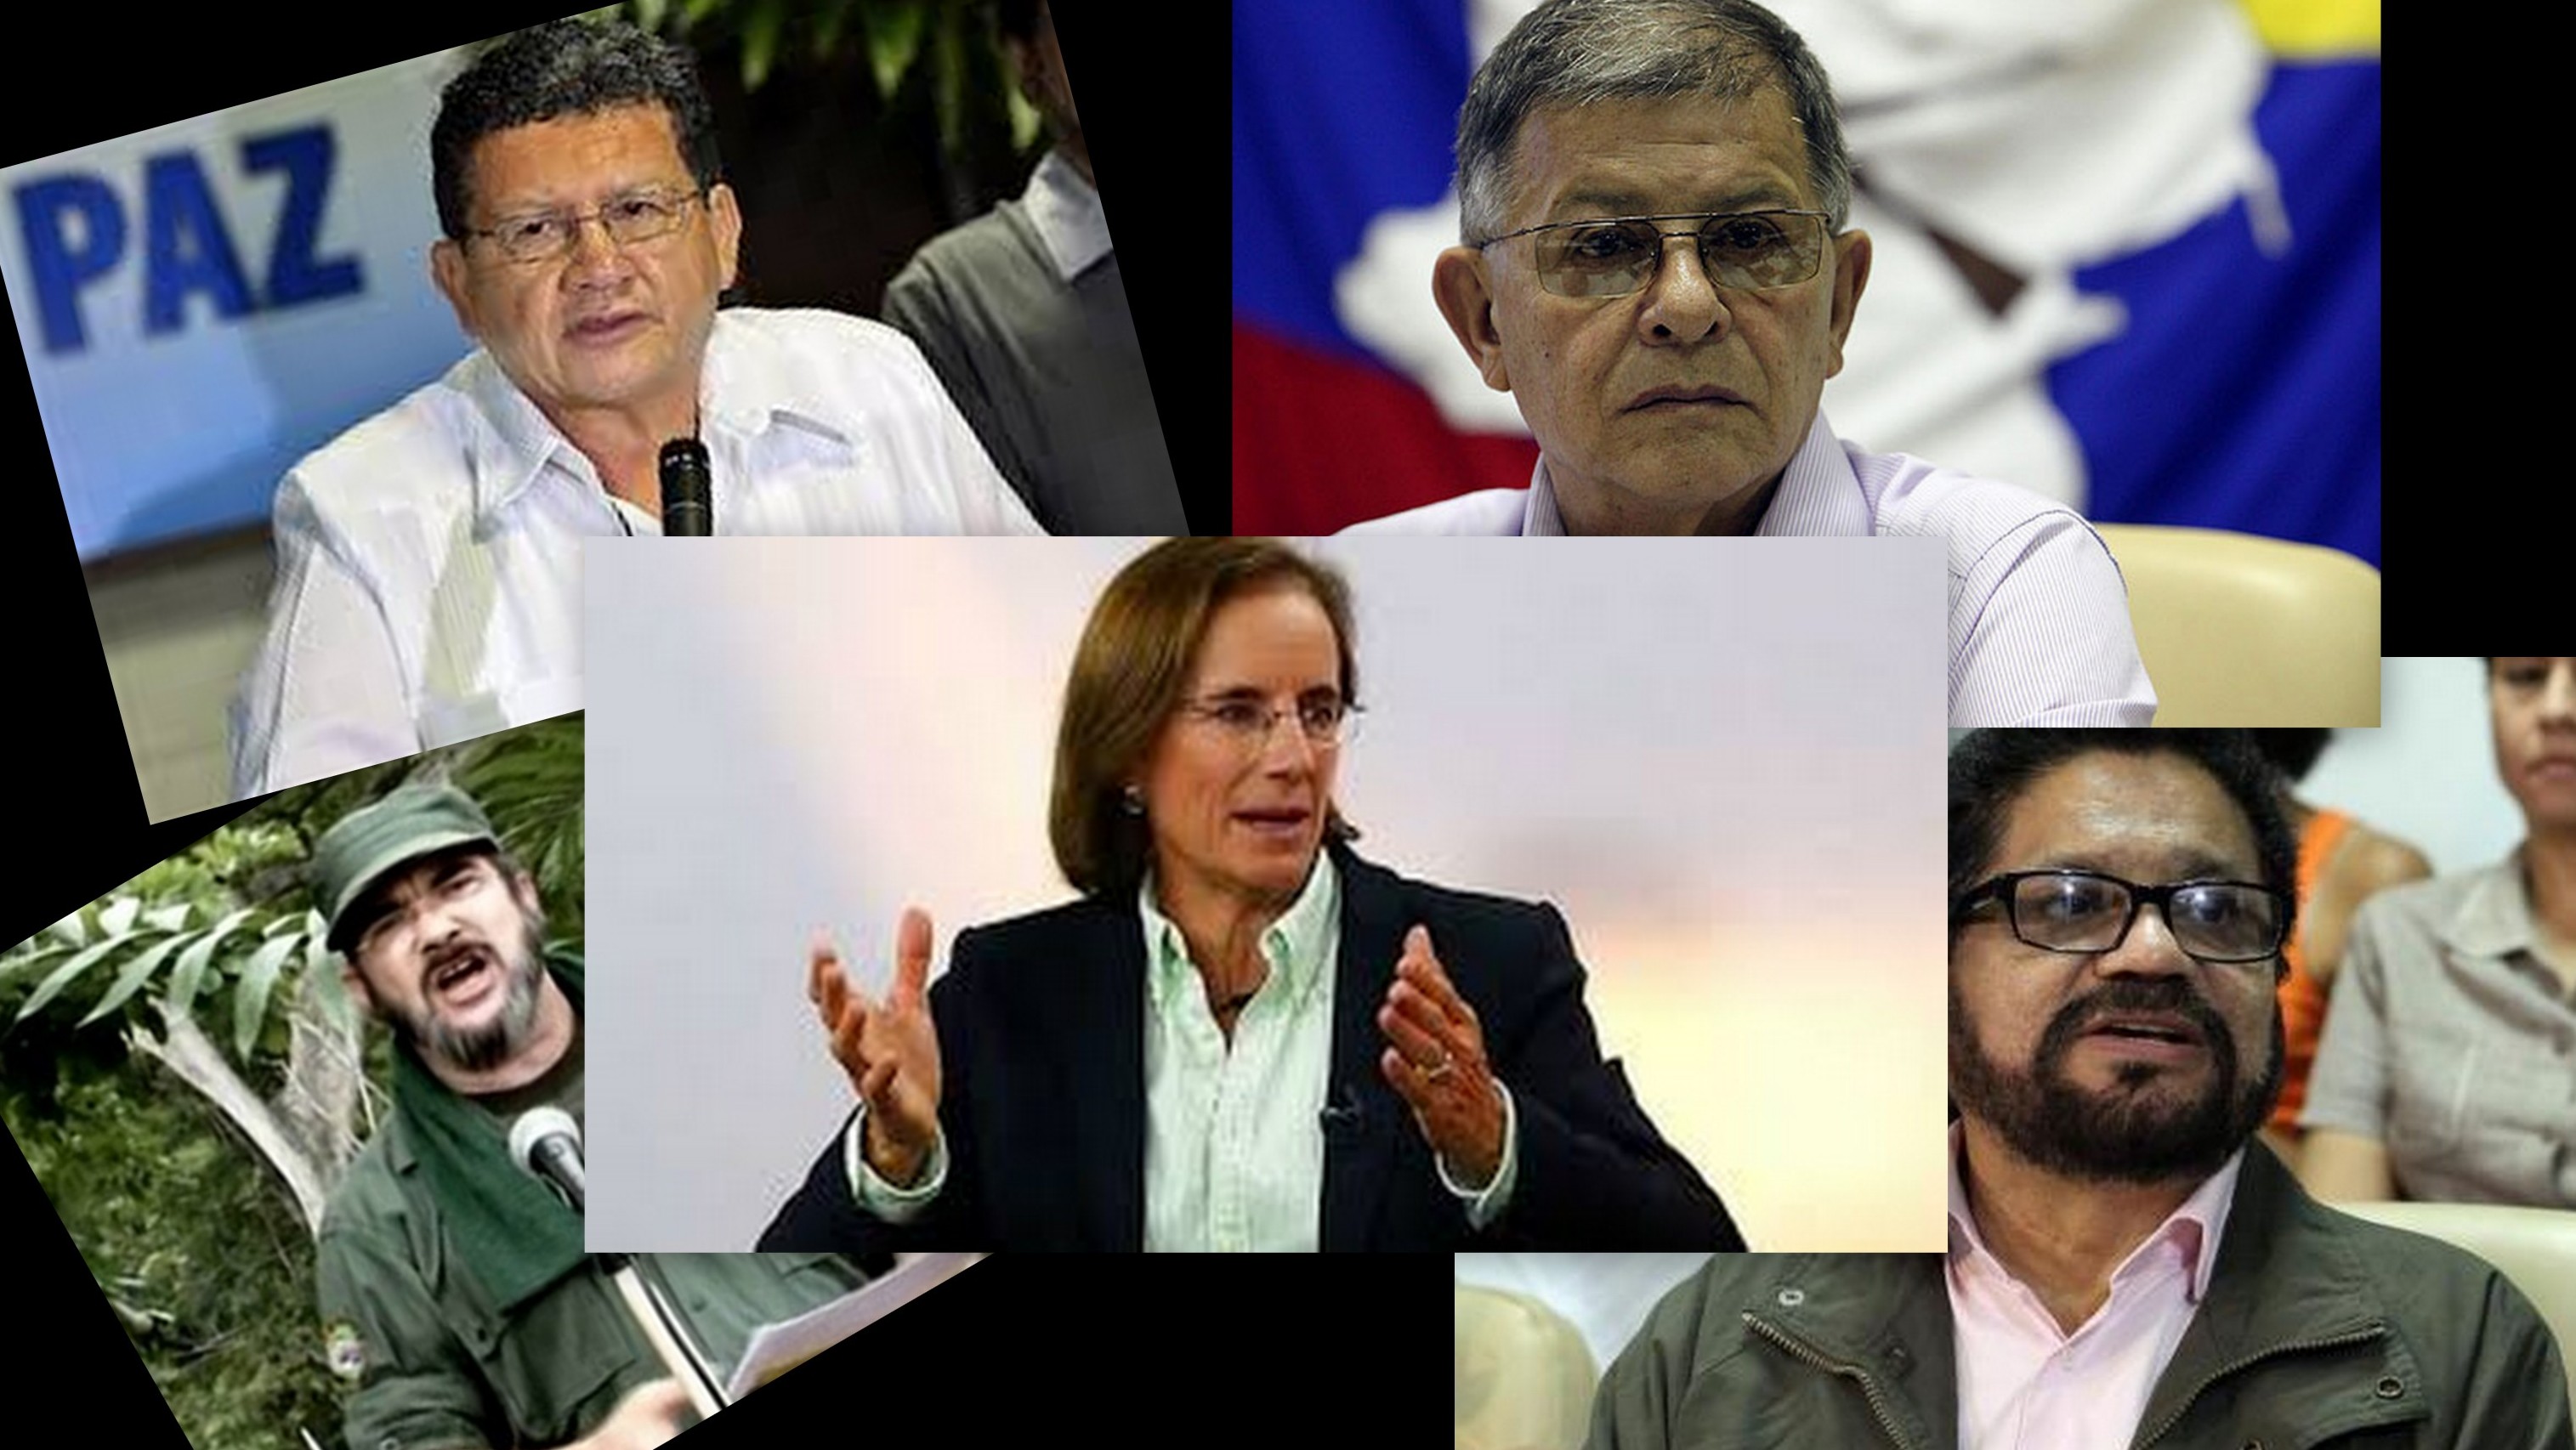 Collage Salud-lideres-farc